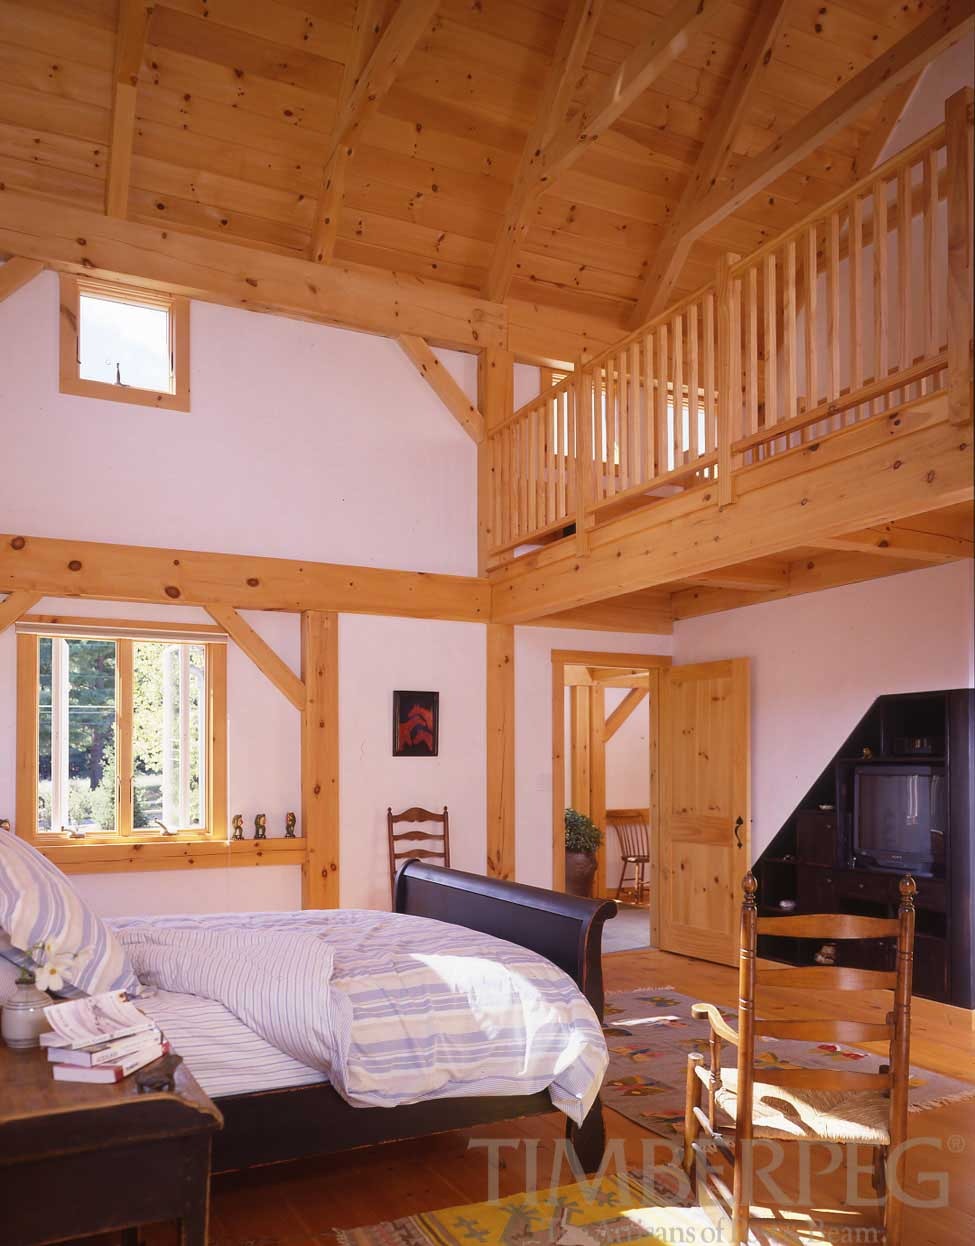 Connecticut Barn Home (4500) bedroom with cathedral ceiling and loft